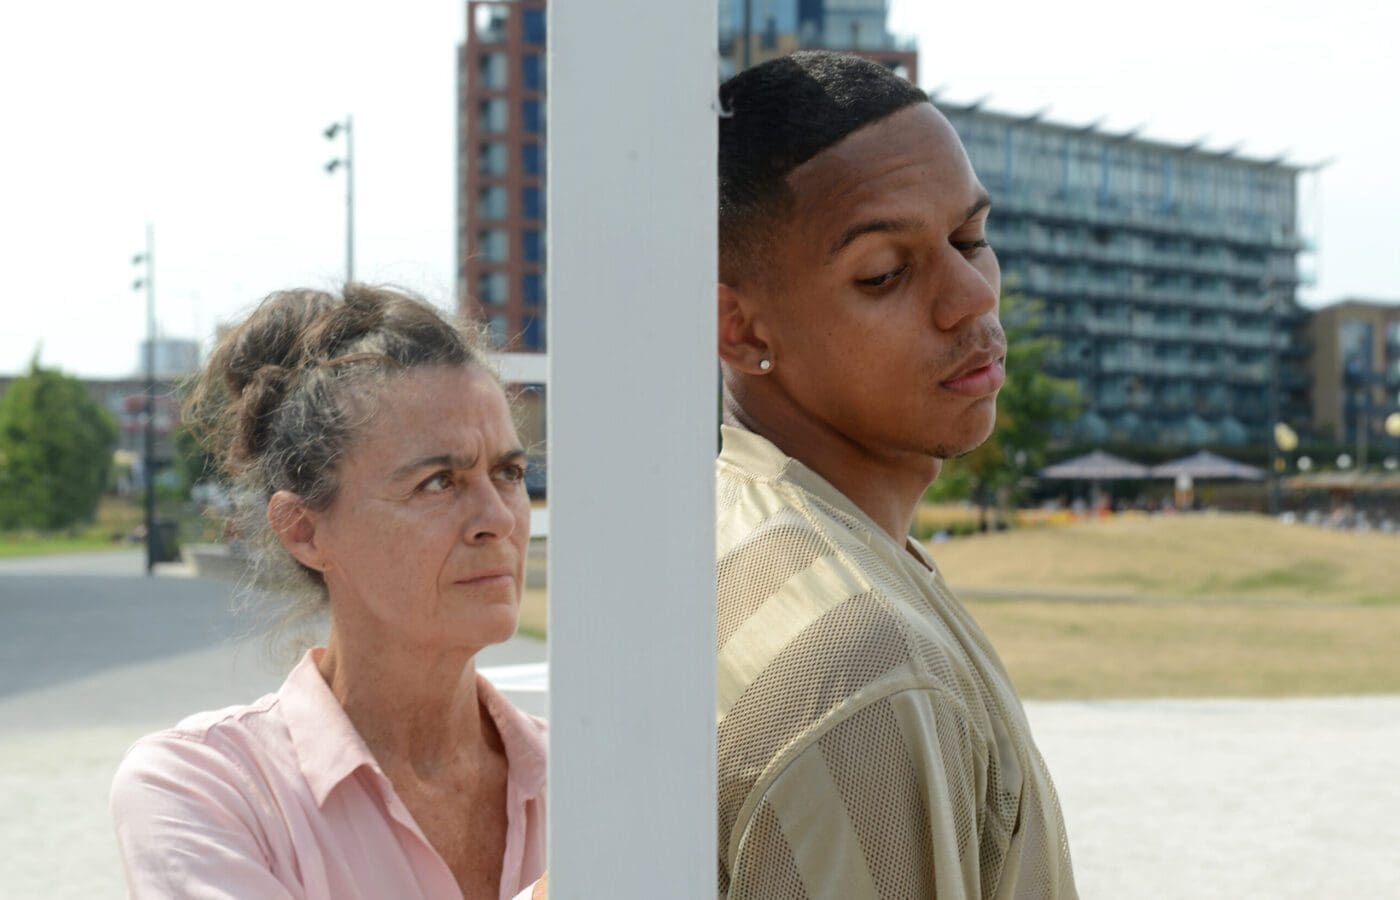 A caucasian female in her sixties and a black male in his twenties stand outside